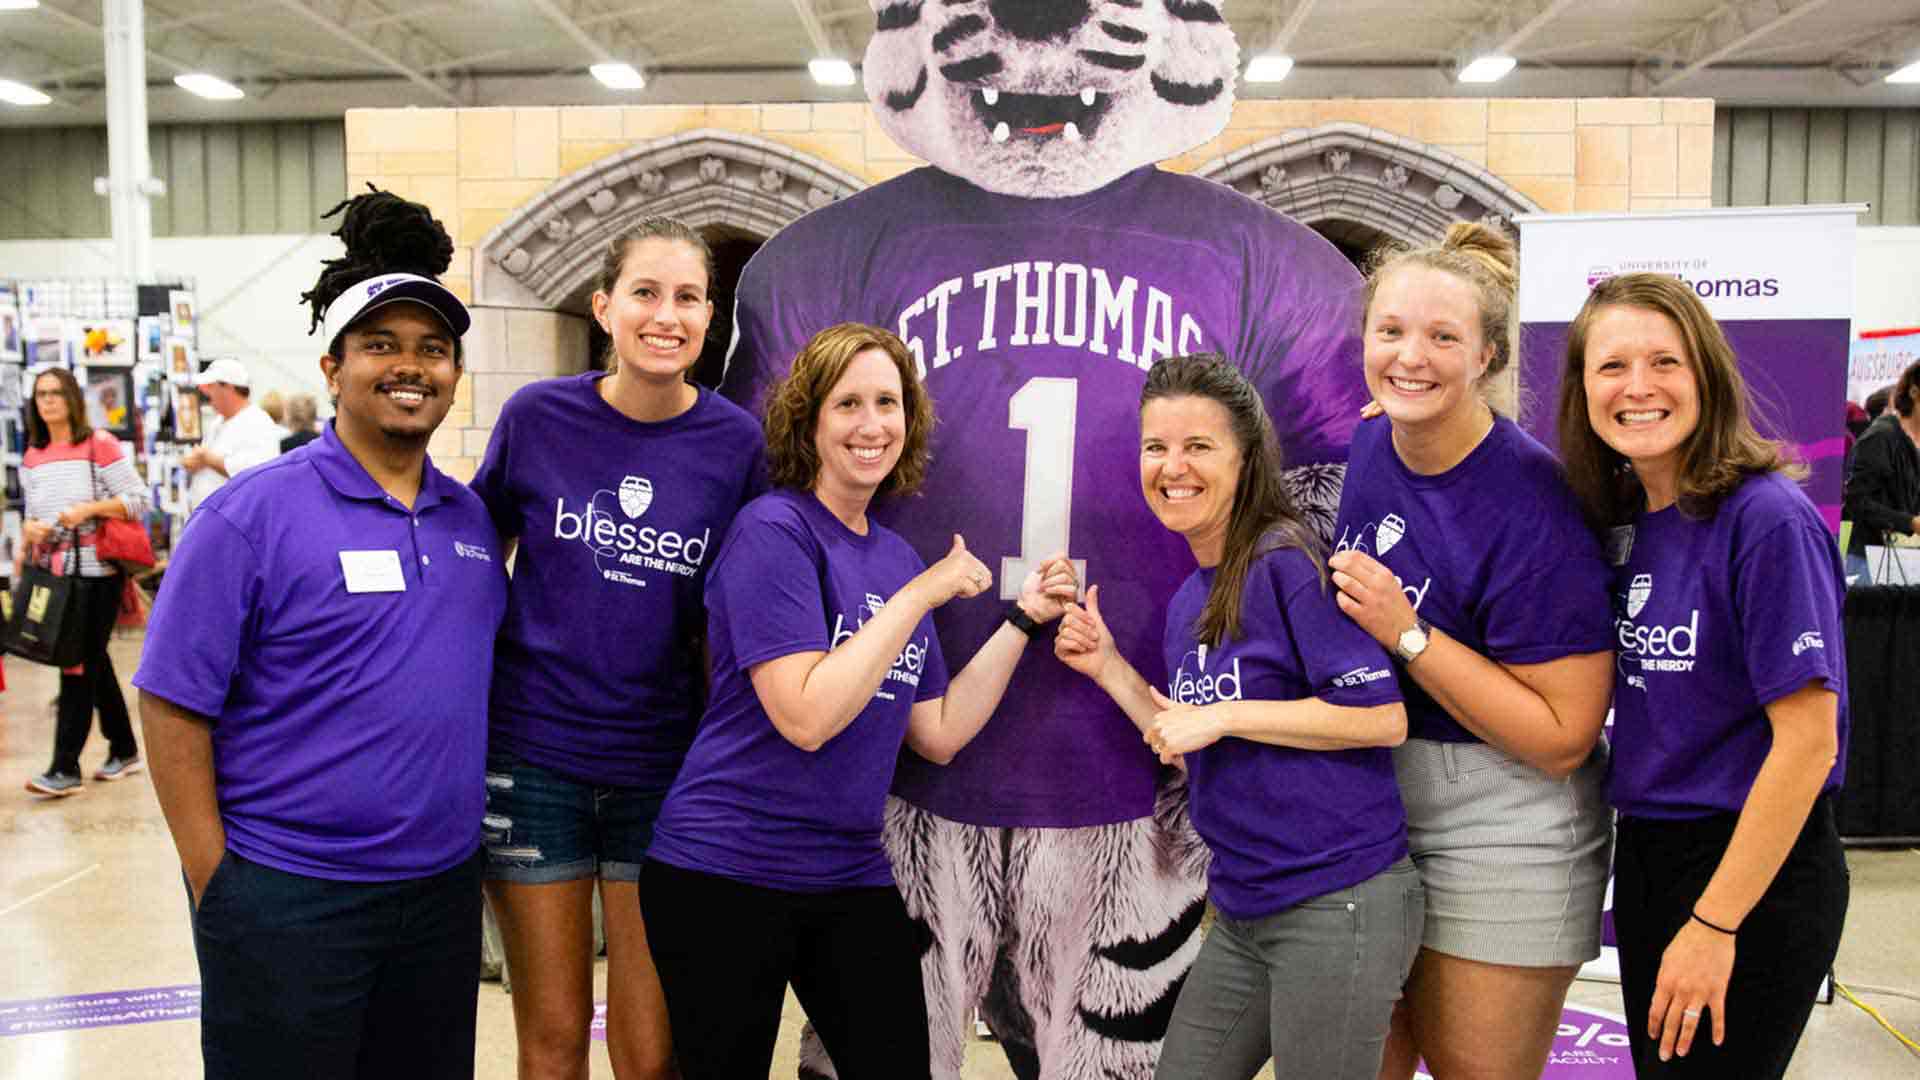 Staffers and student works pose with a cutout of Tommie the mascot at the Minnesota State Fair.